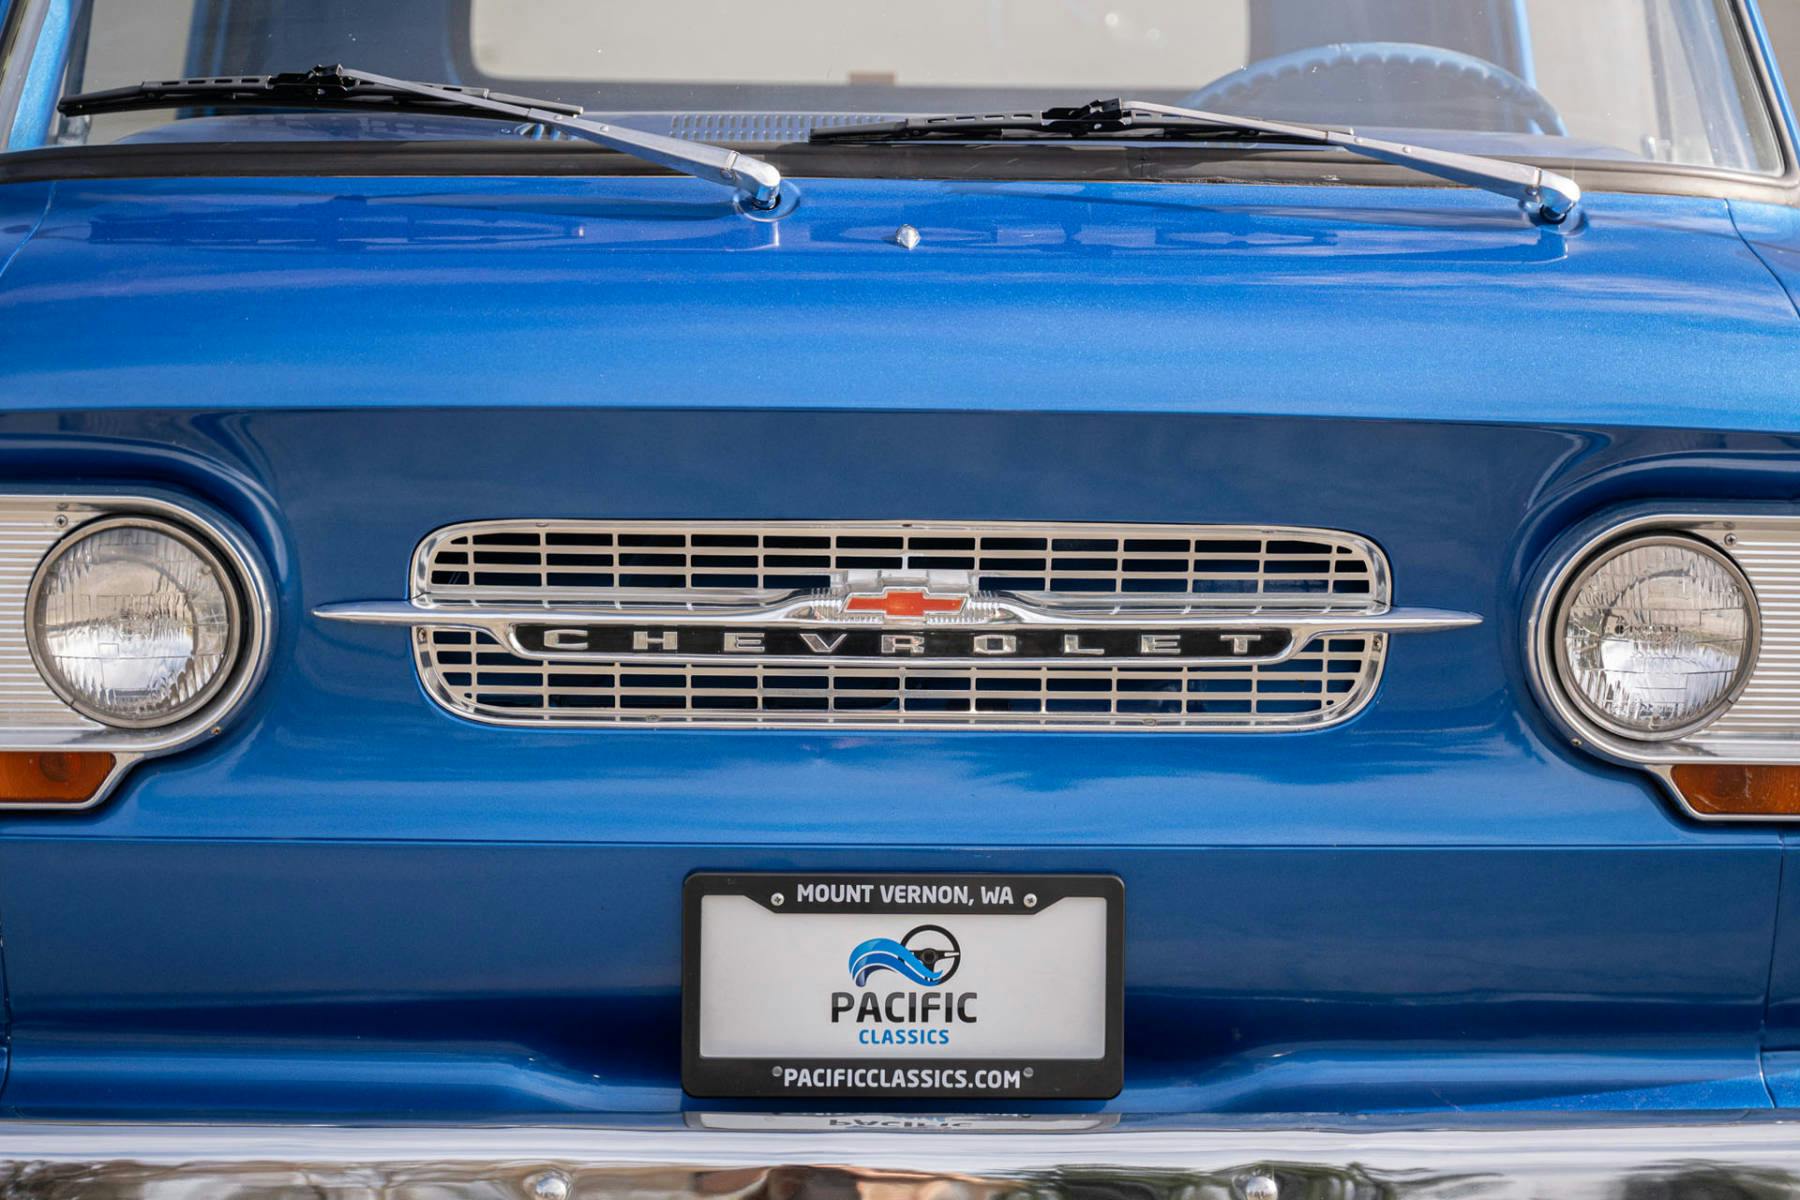 1961 Chevrolet Corvair 95 Rampside Pickup grille